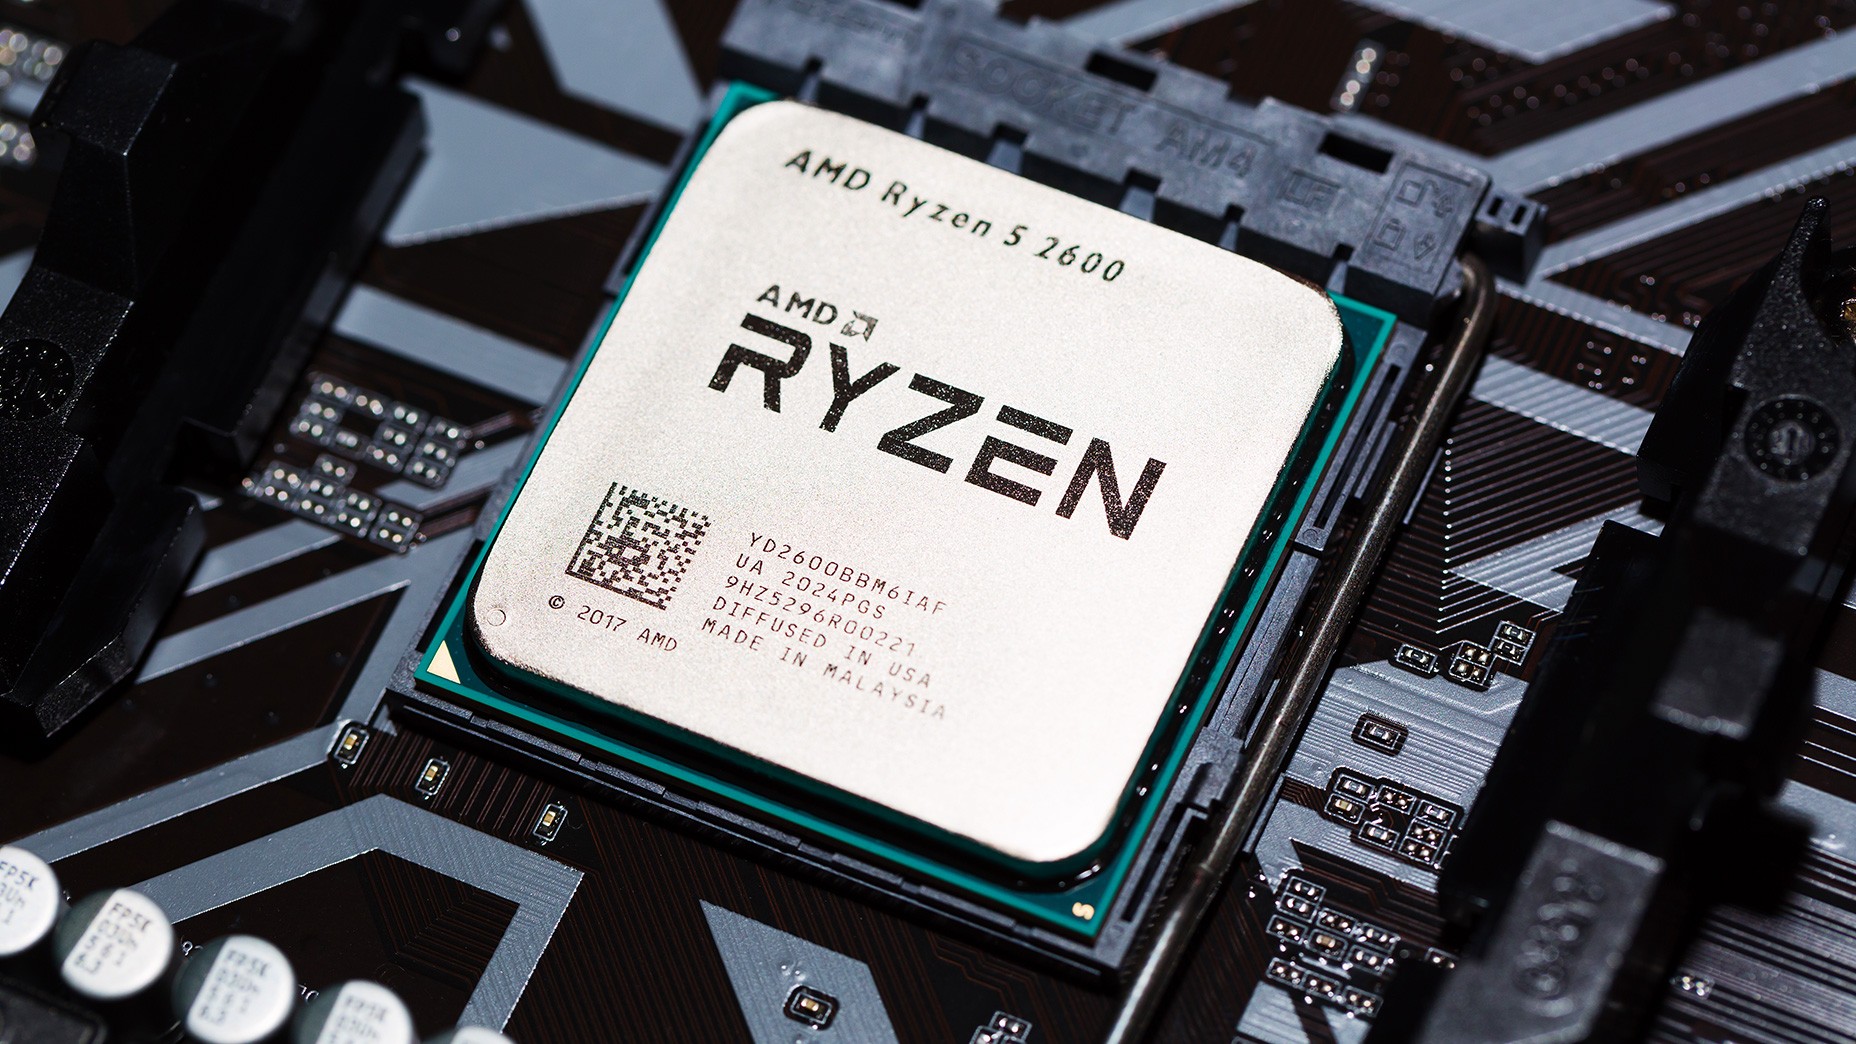 AMD's Profit Surged by Over 1000%: Implications for the Stock